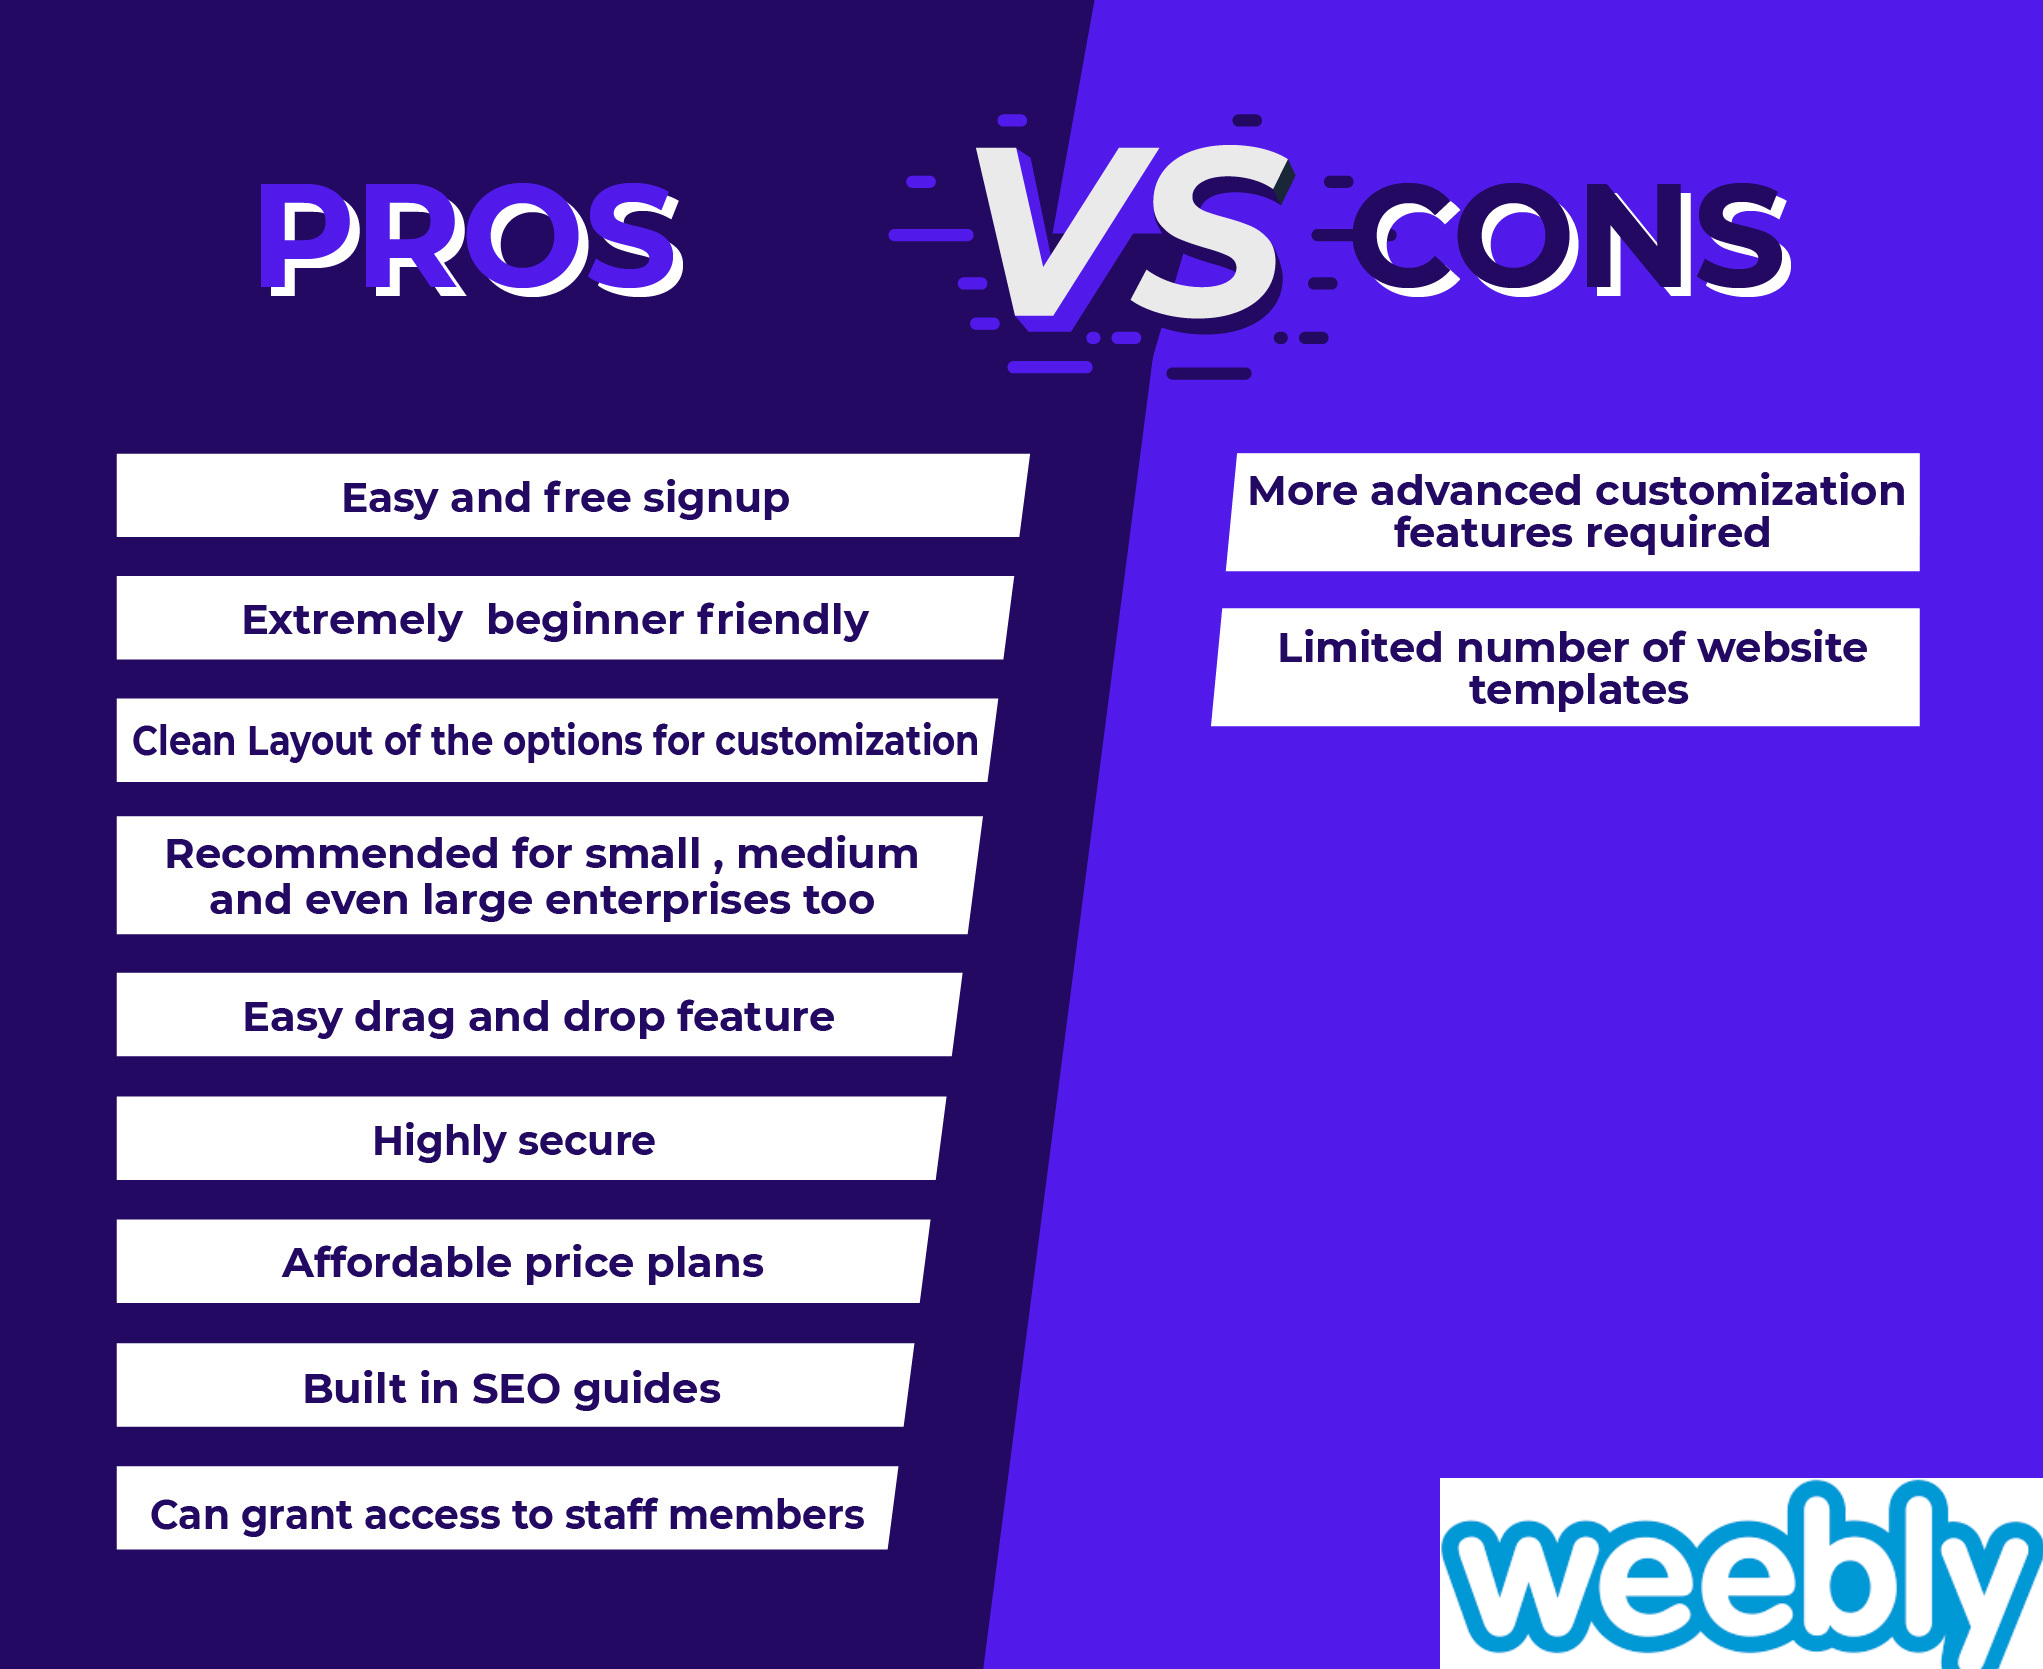 Weebly pros and cons